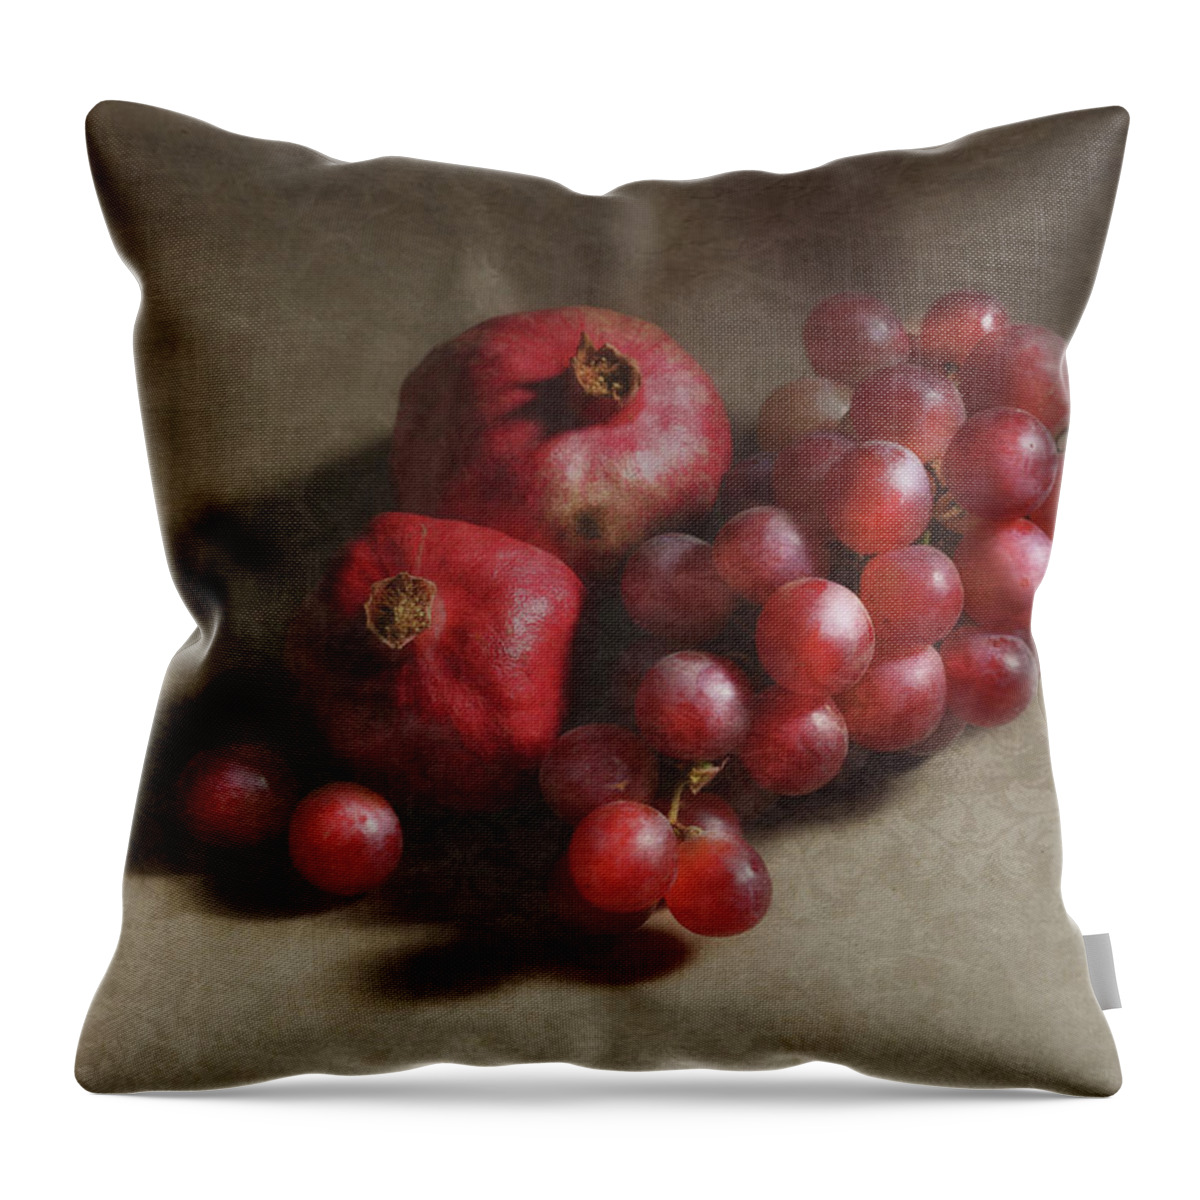 Still Life Throw Pillow featuring the photograph Poms and Grapes by Kandy Hurley